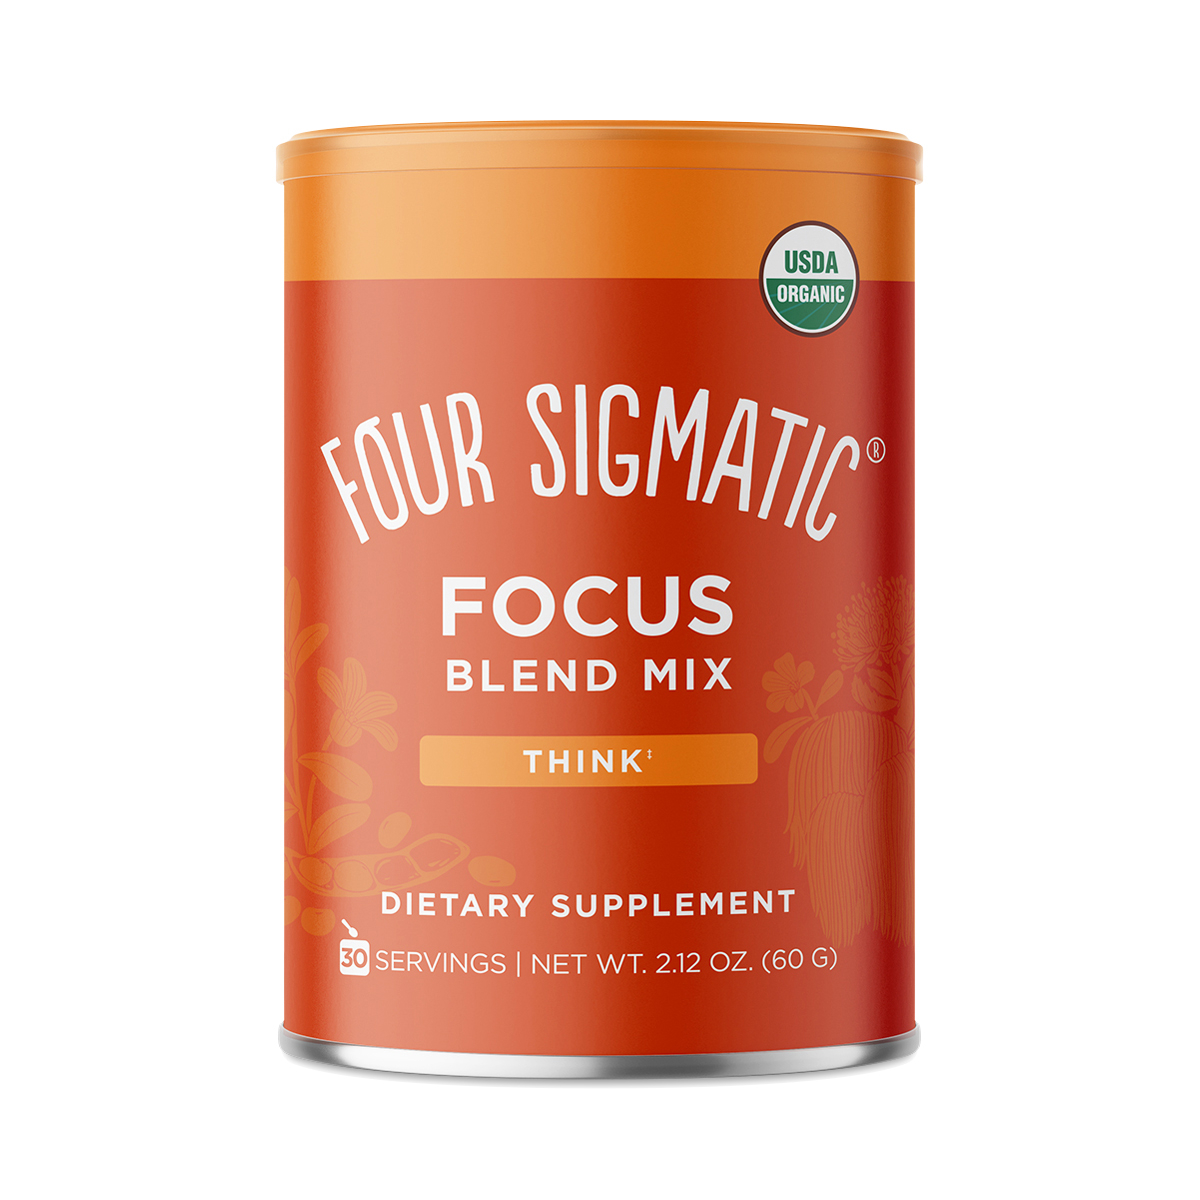 Four Sigmatic Focus Blend Mix 2.12 oz canister